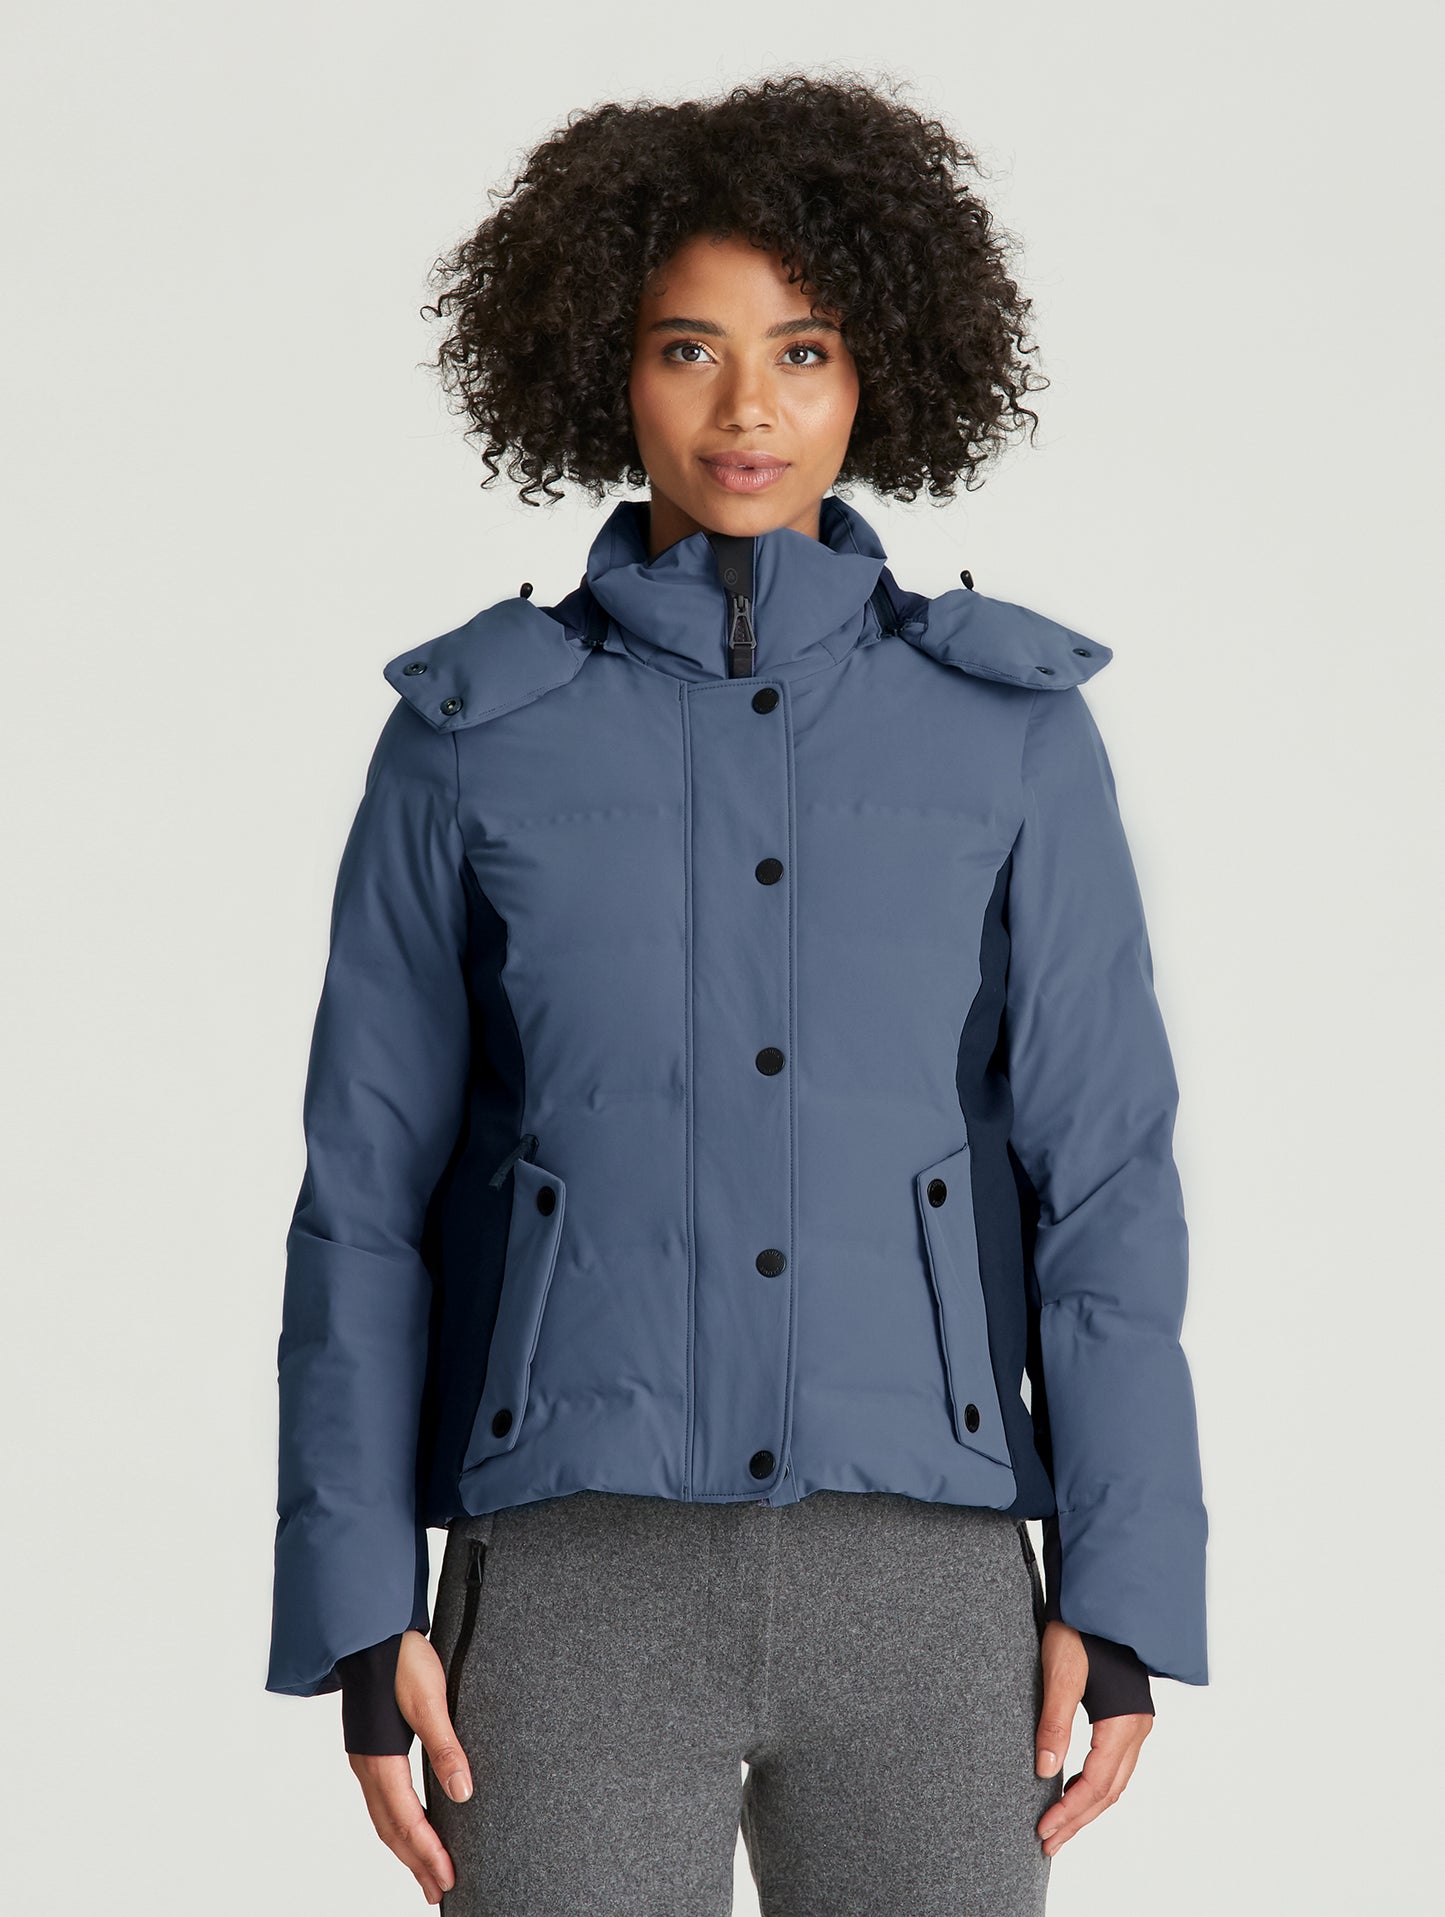 woman wearing blue ski jacket from Aether Apparel